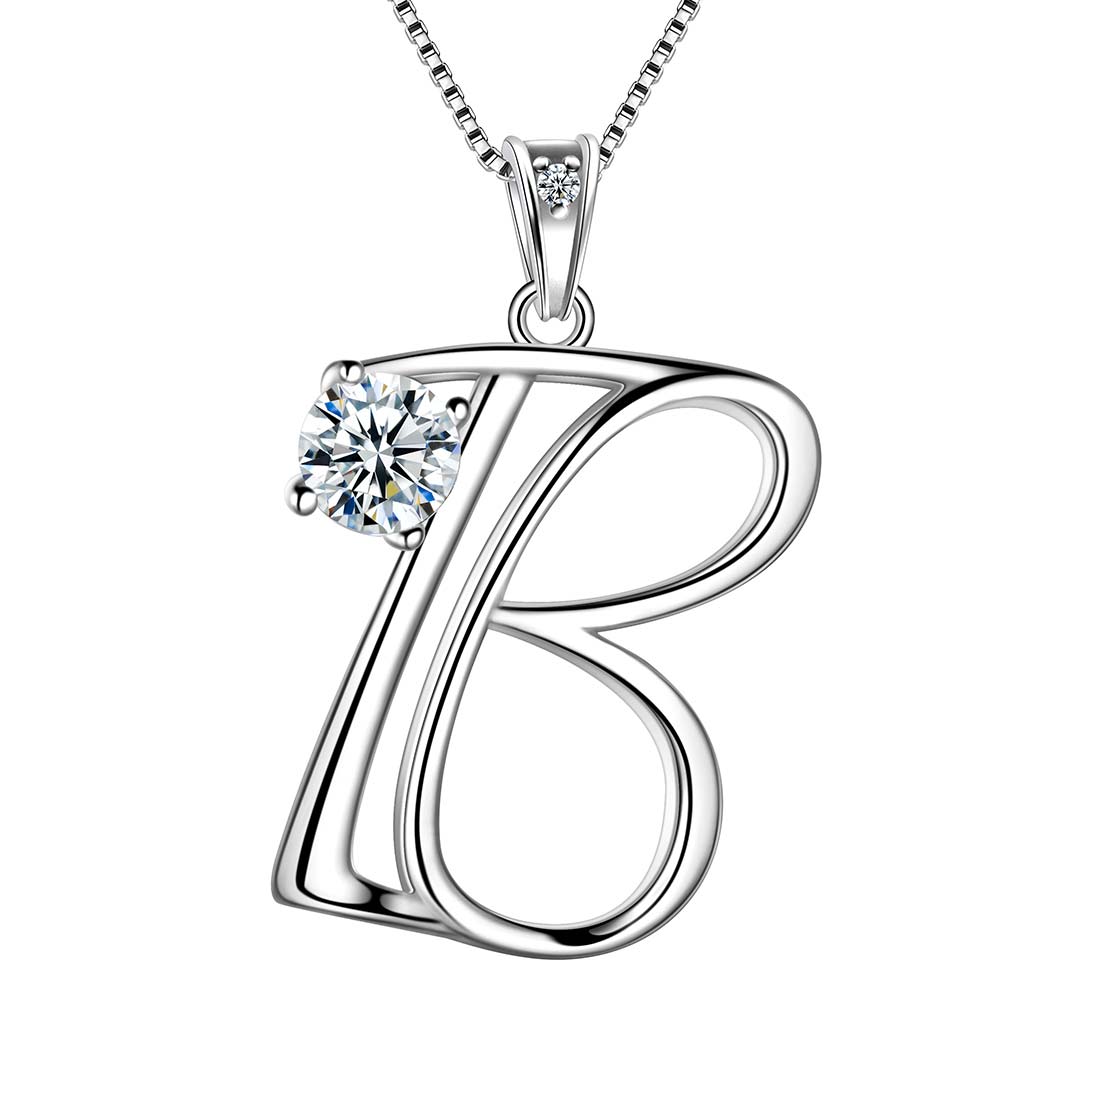 Women Letter B Initial Necklaces Sterling Silver - Necklaces - Aurora Tears Jewelry